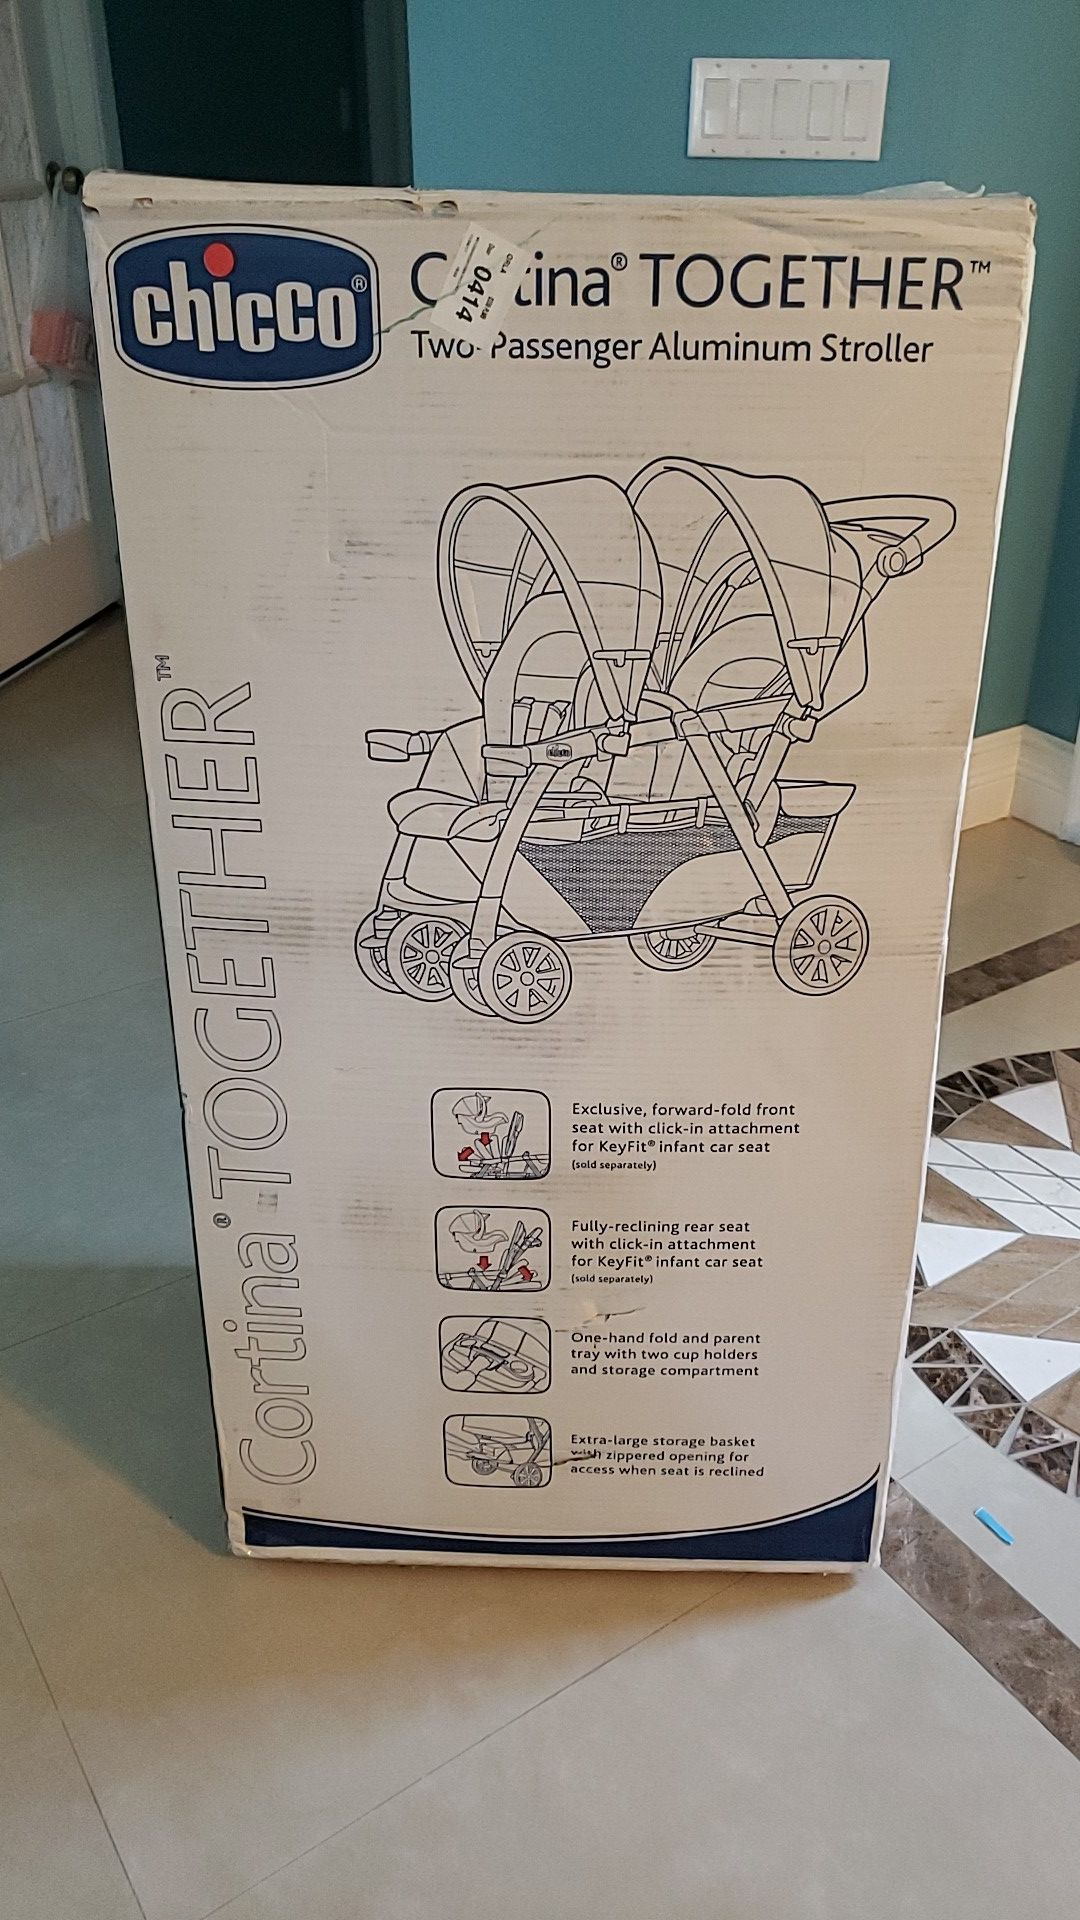 Chicco cortina together aluminum stroller